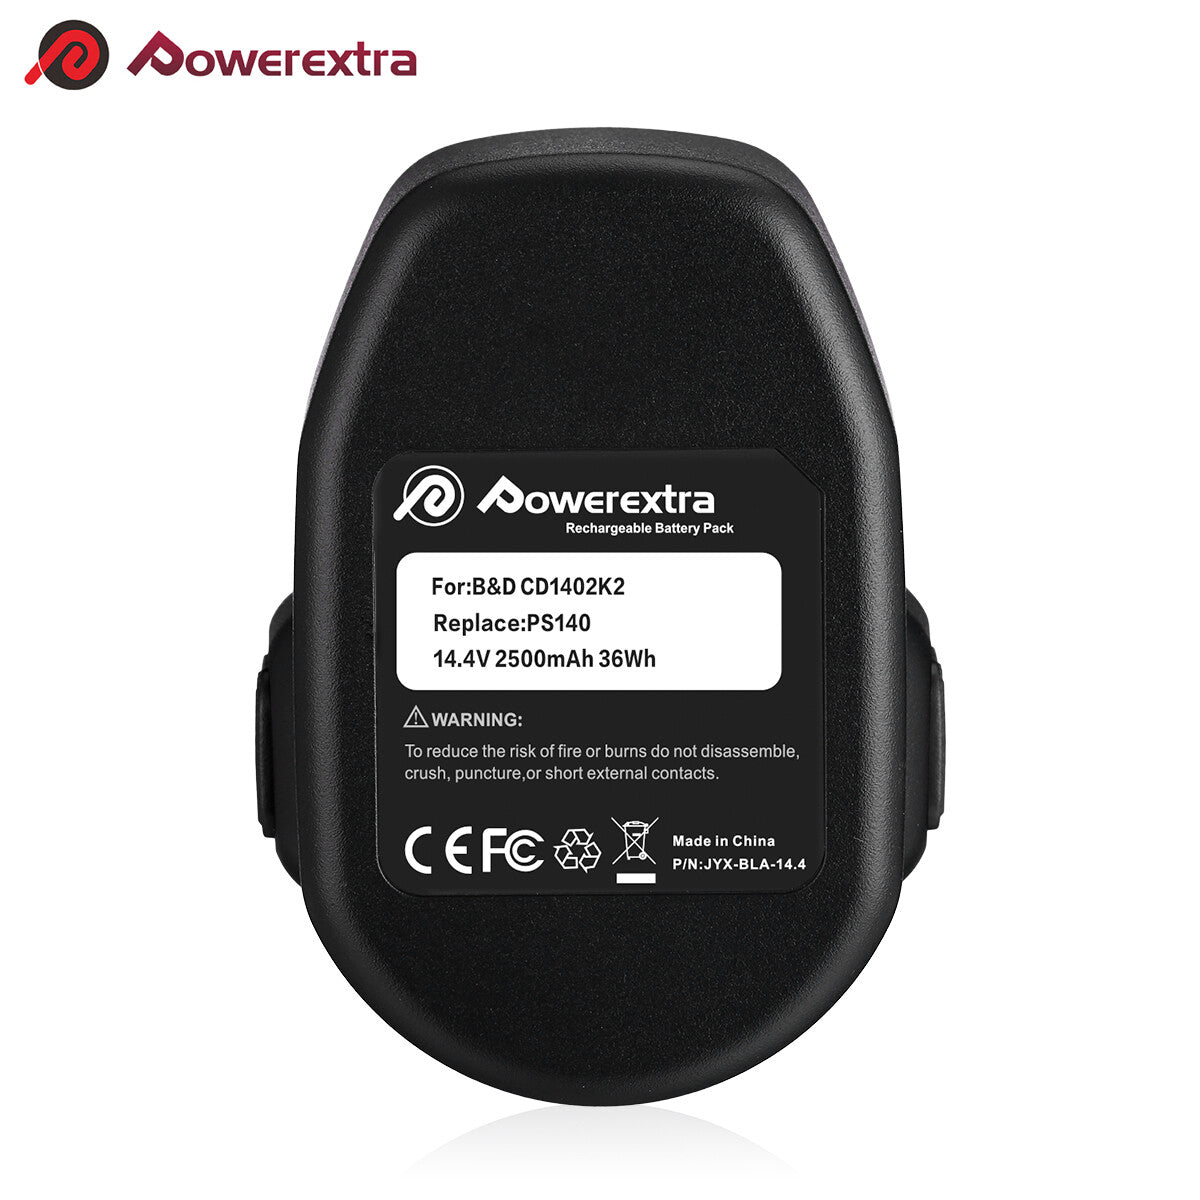  Powerextra 2500mah 14.4V Replacement Battery for